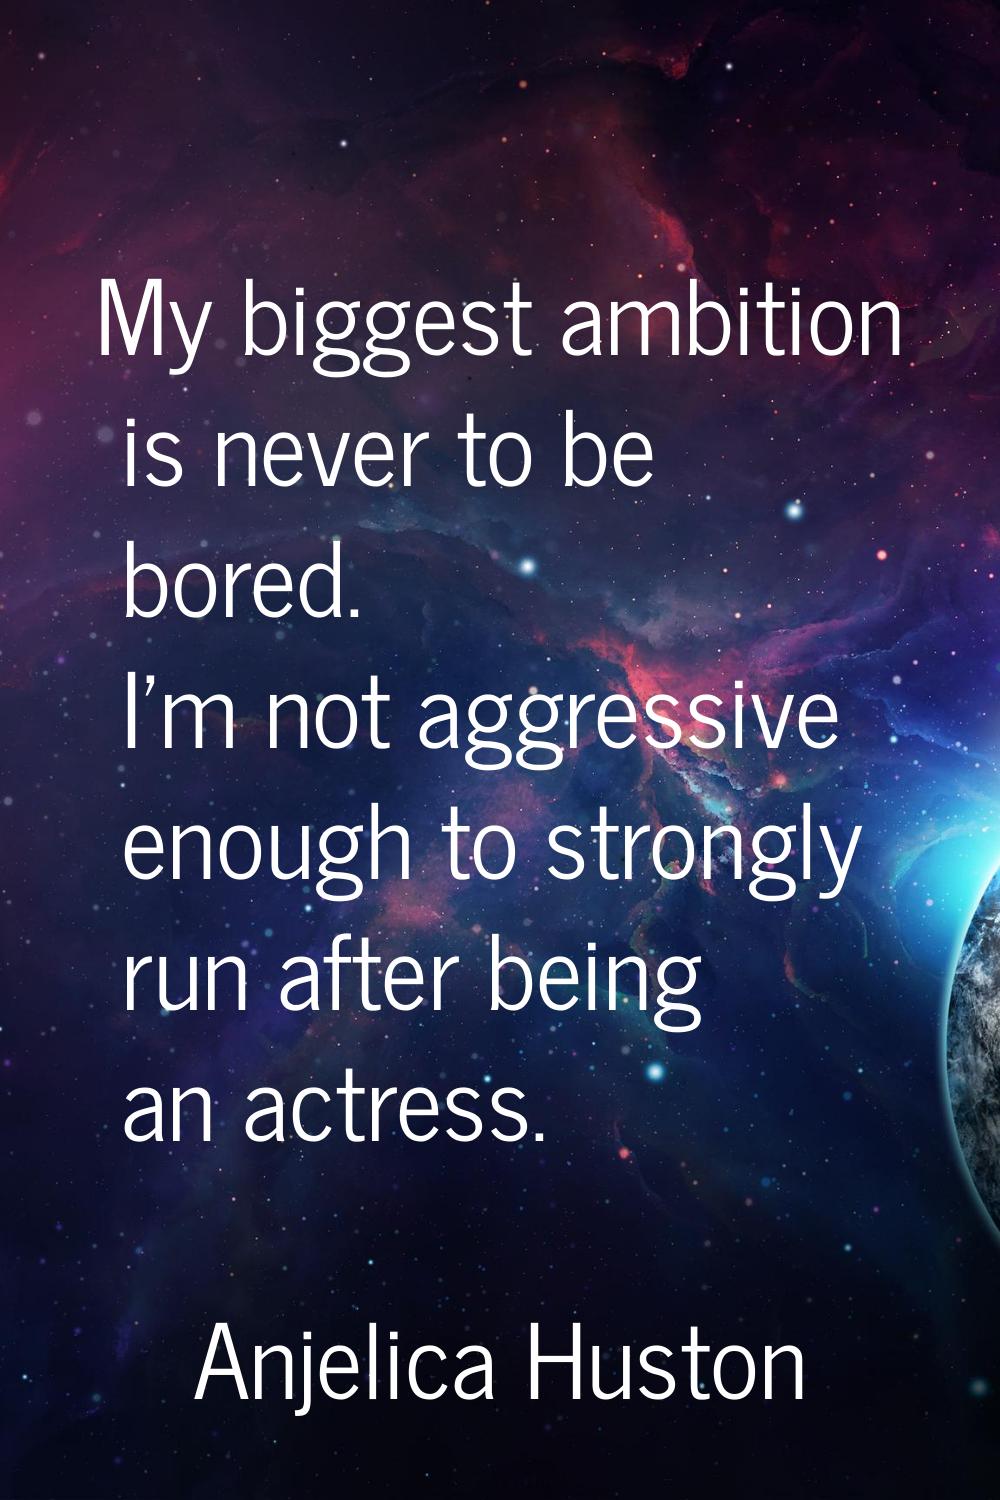 My biggest ambition is never to be bored. I'm not aggressive enough to strongly run after being an 